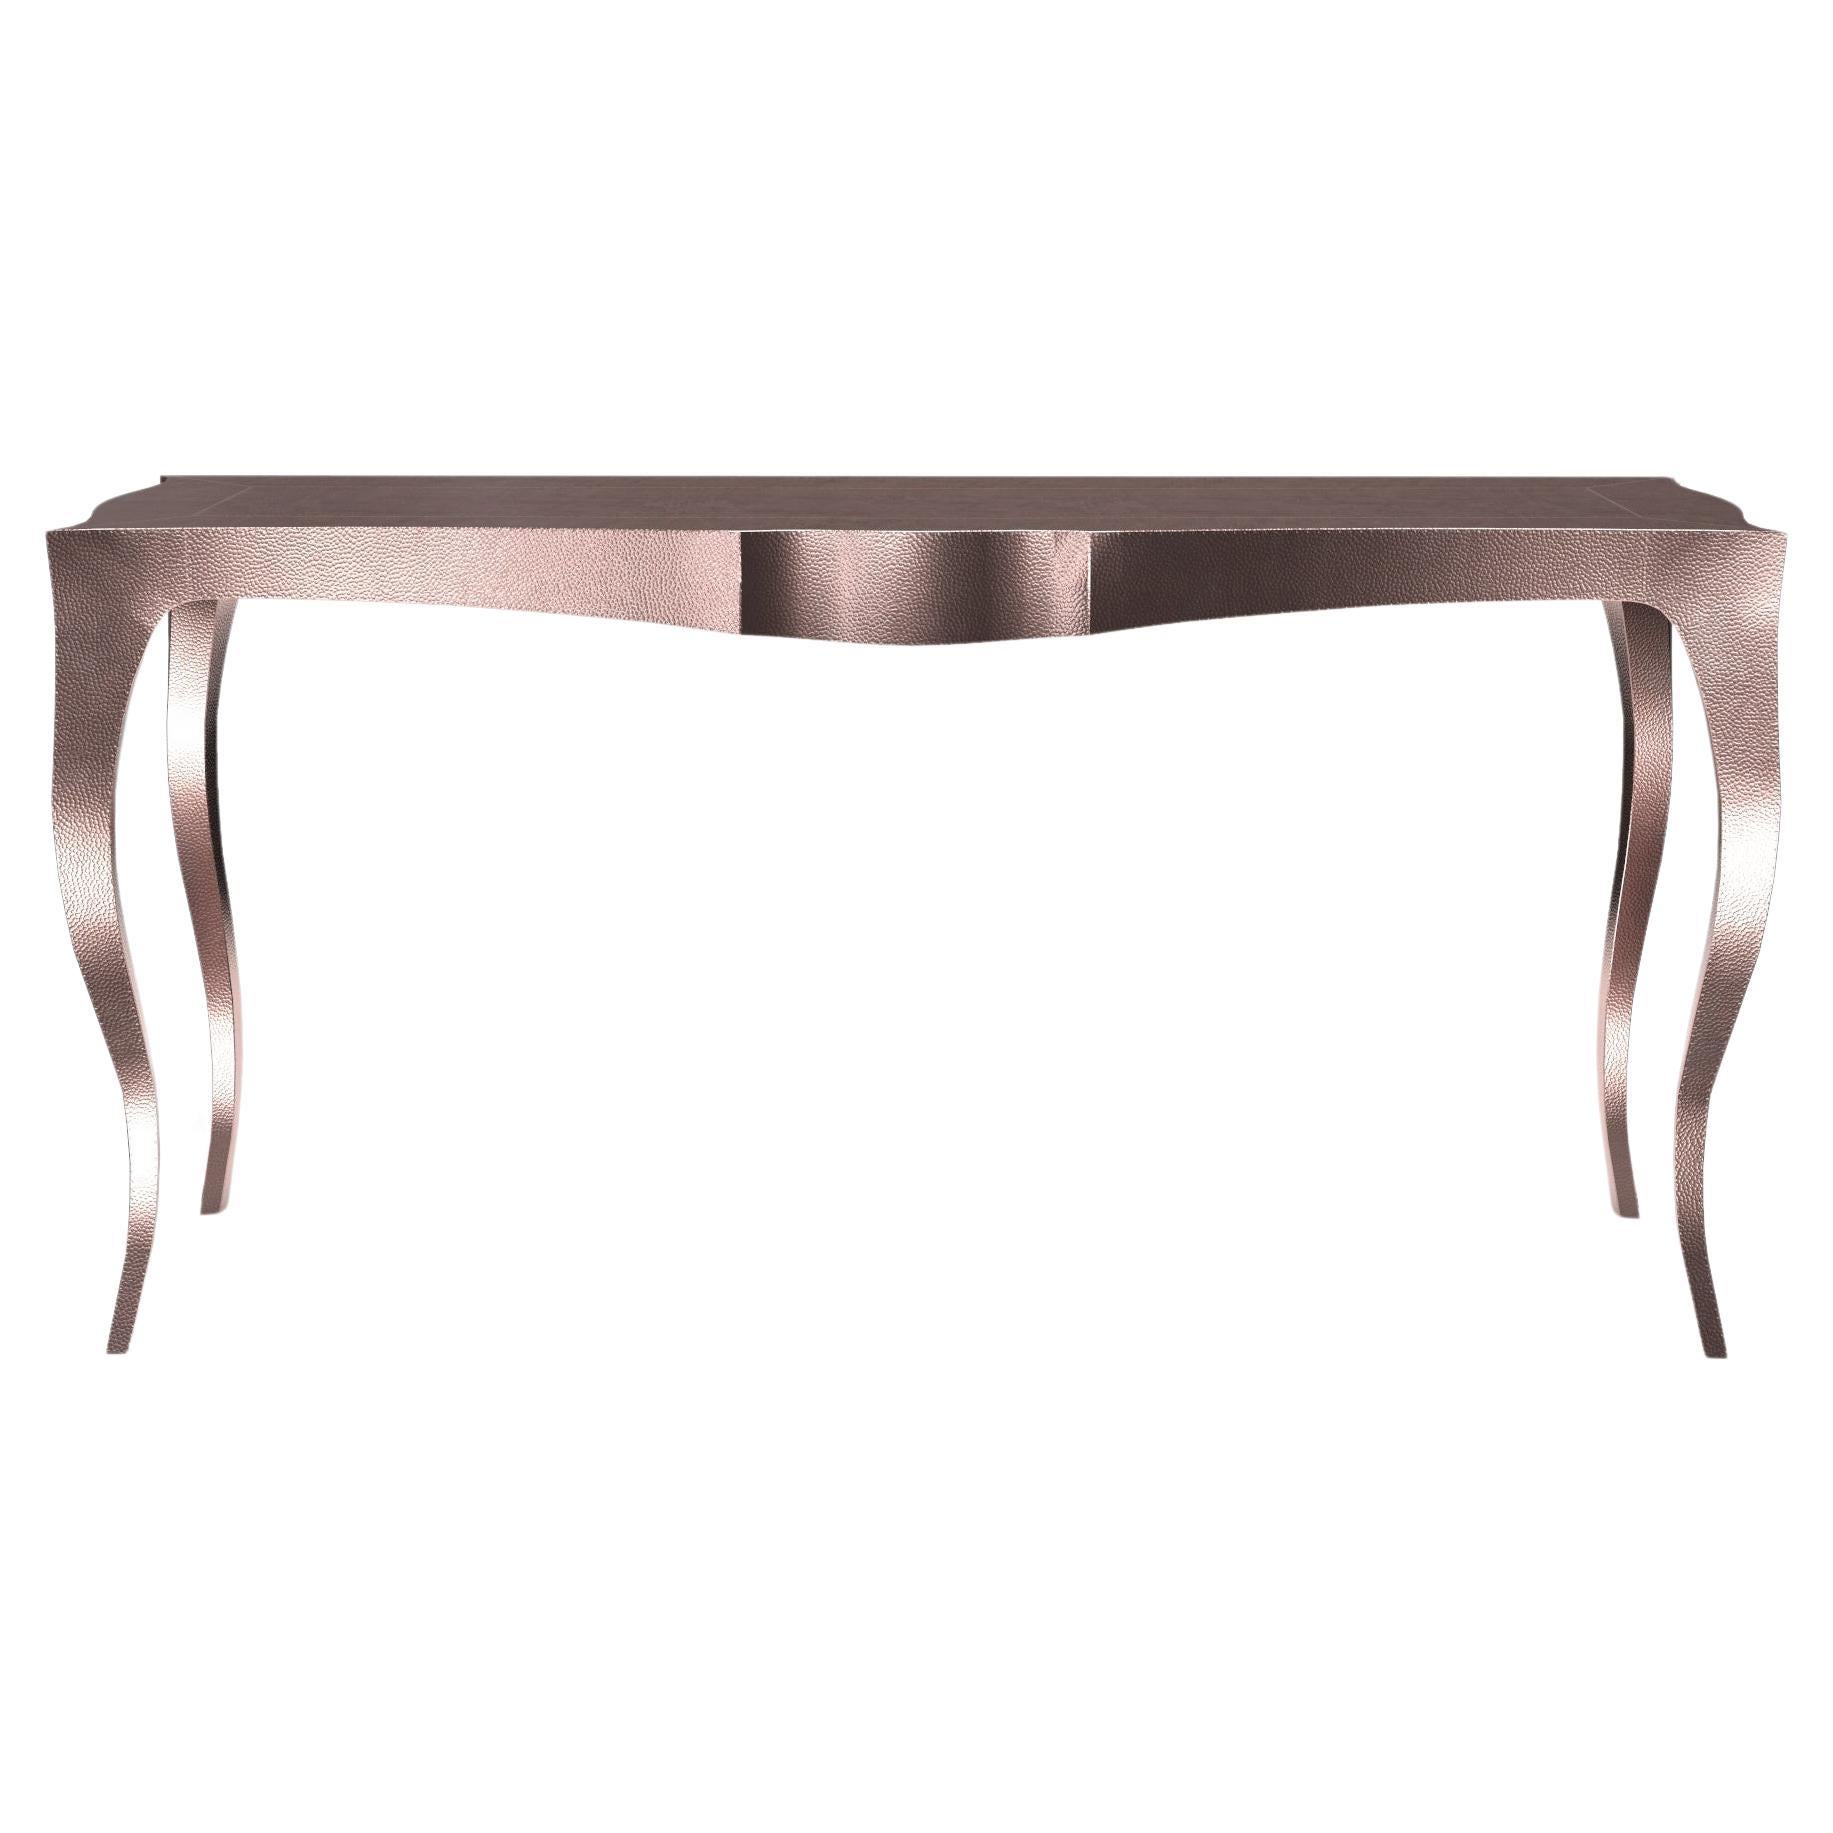 Louise Console Art Nouveau Tray Tables Mid. Hammered Copper by Paul Mathieu  For Sale